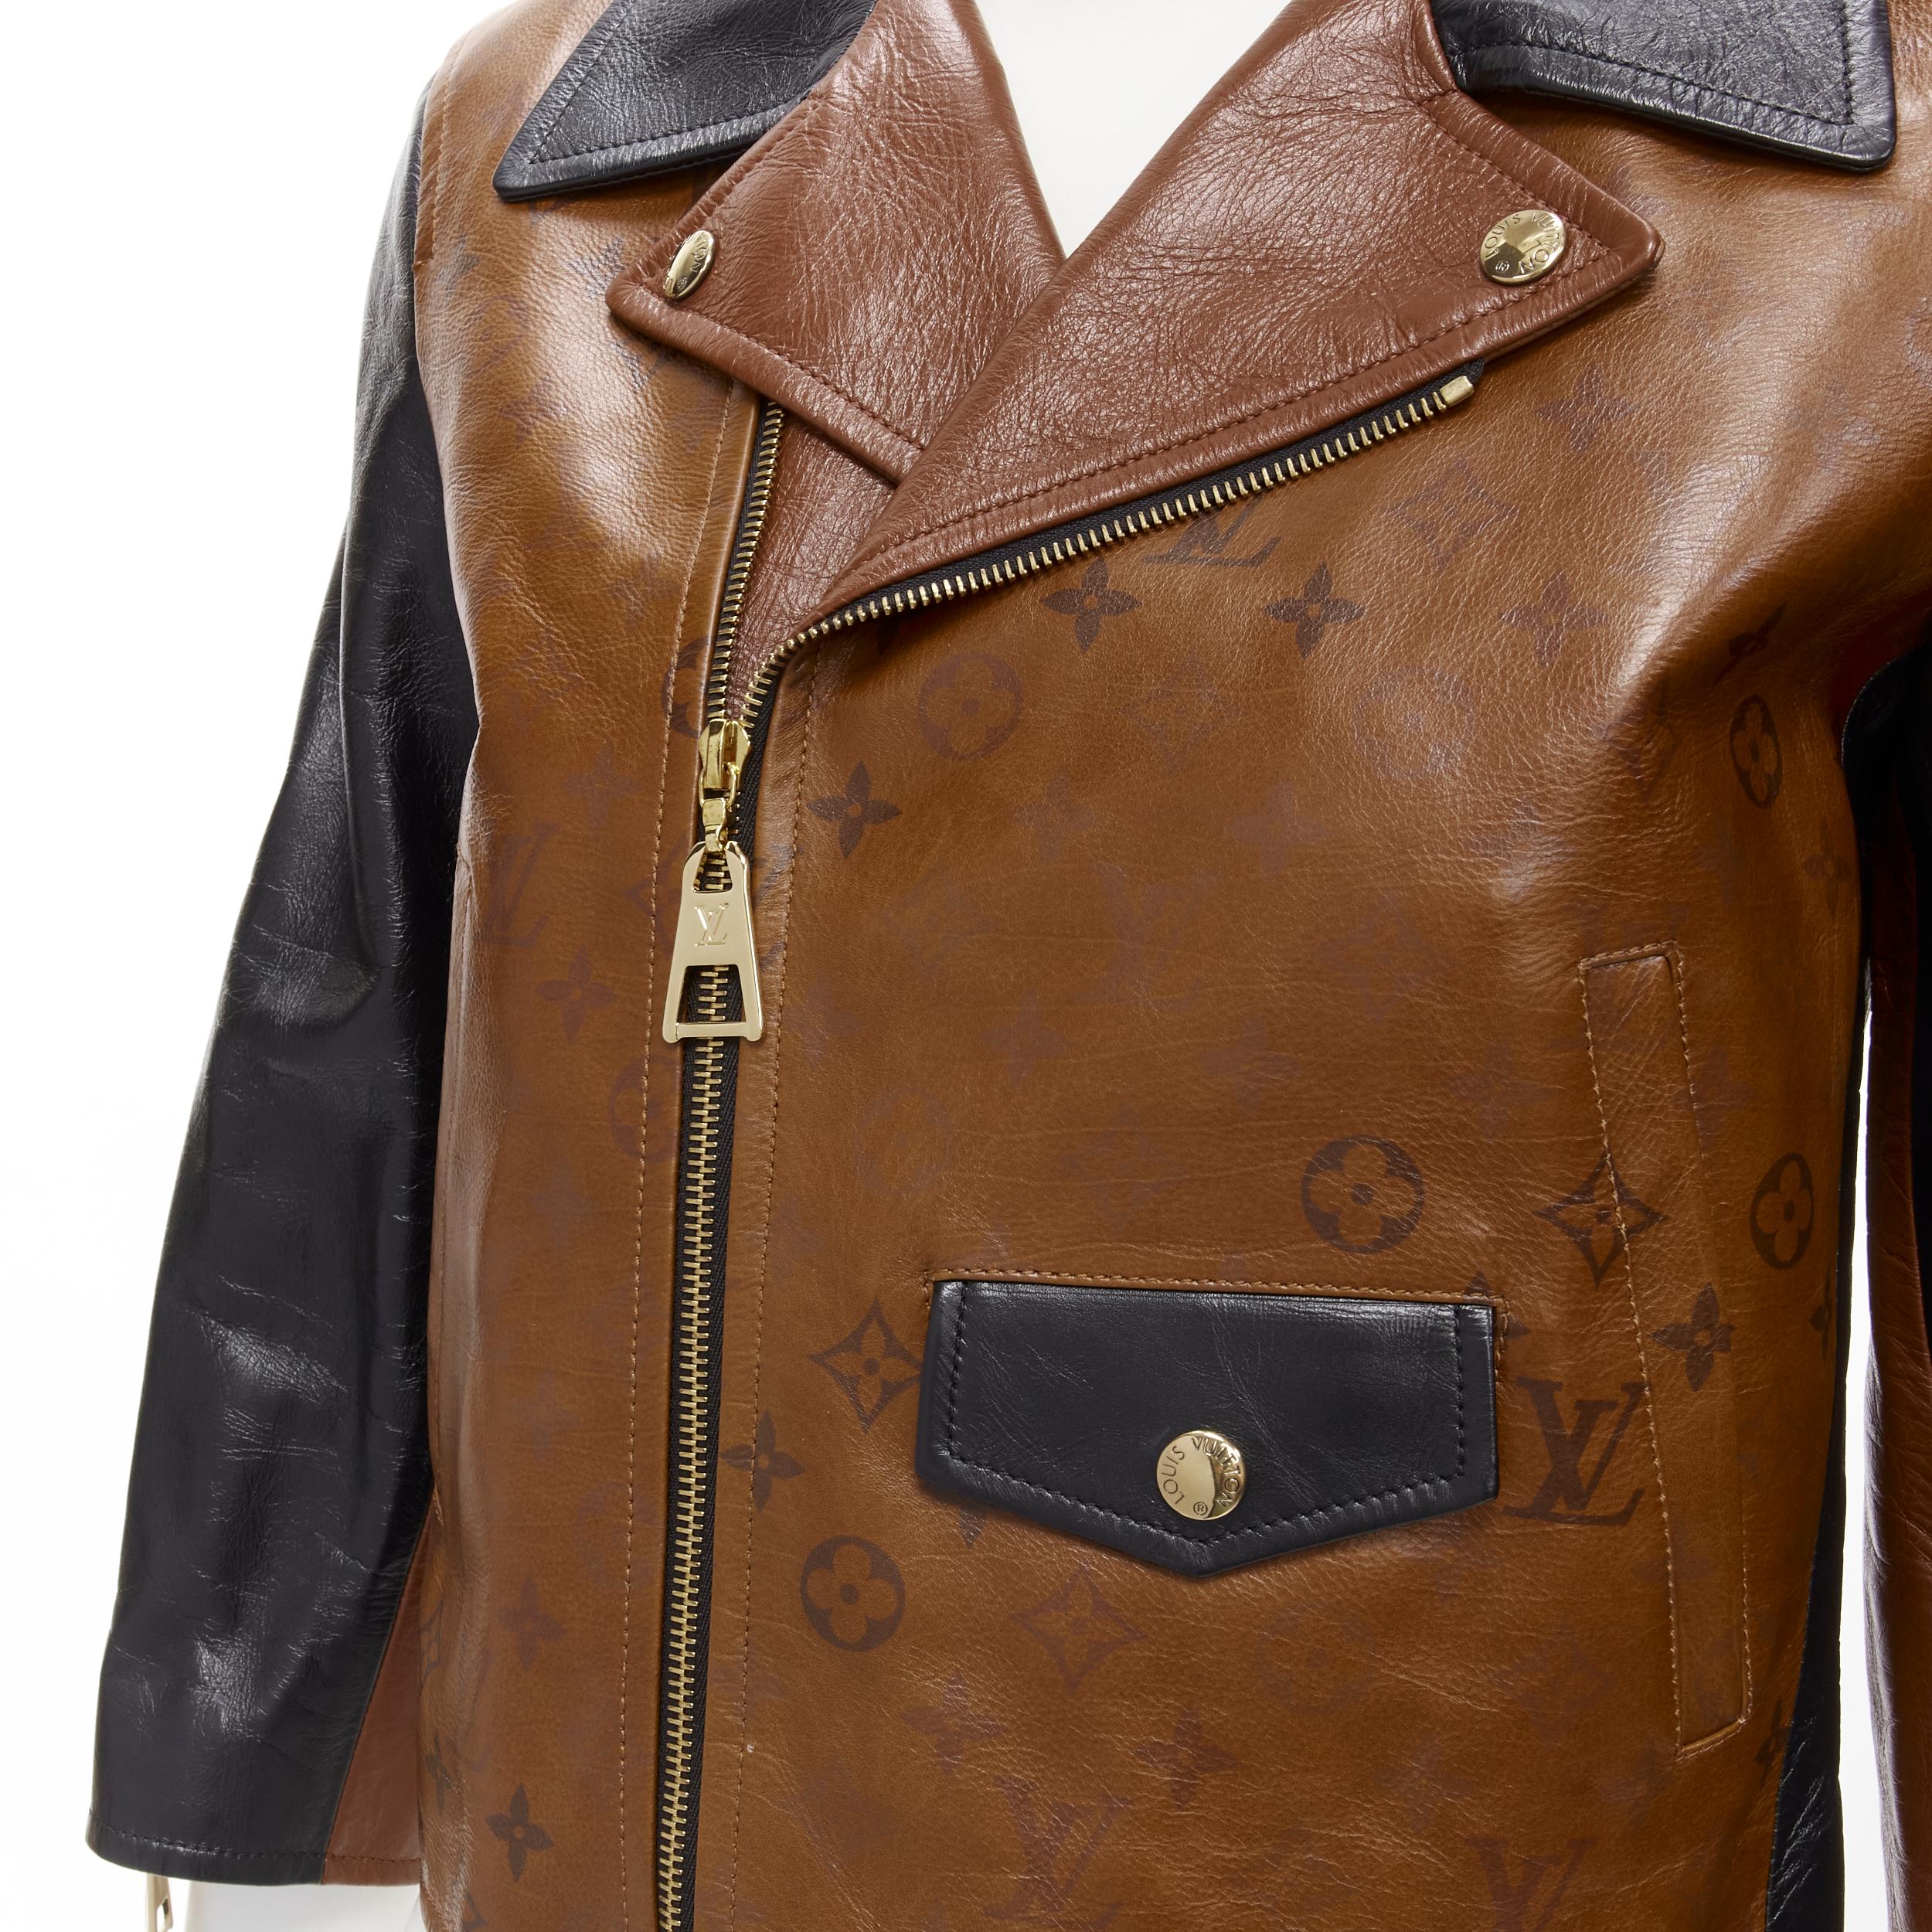 Louis Vuitton Leather Jackets - 12 For Sale on 1stDibs  louis vuitton  monogram leather jacket, lv jacket, leather jacket louis vuitton